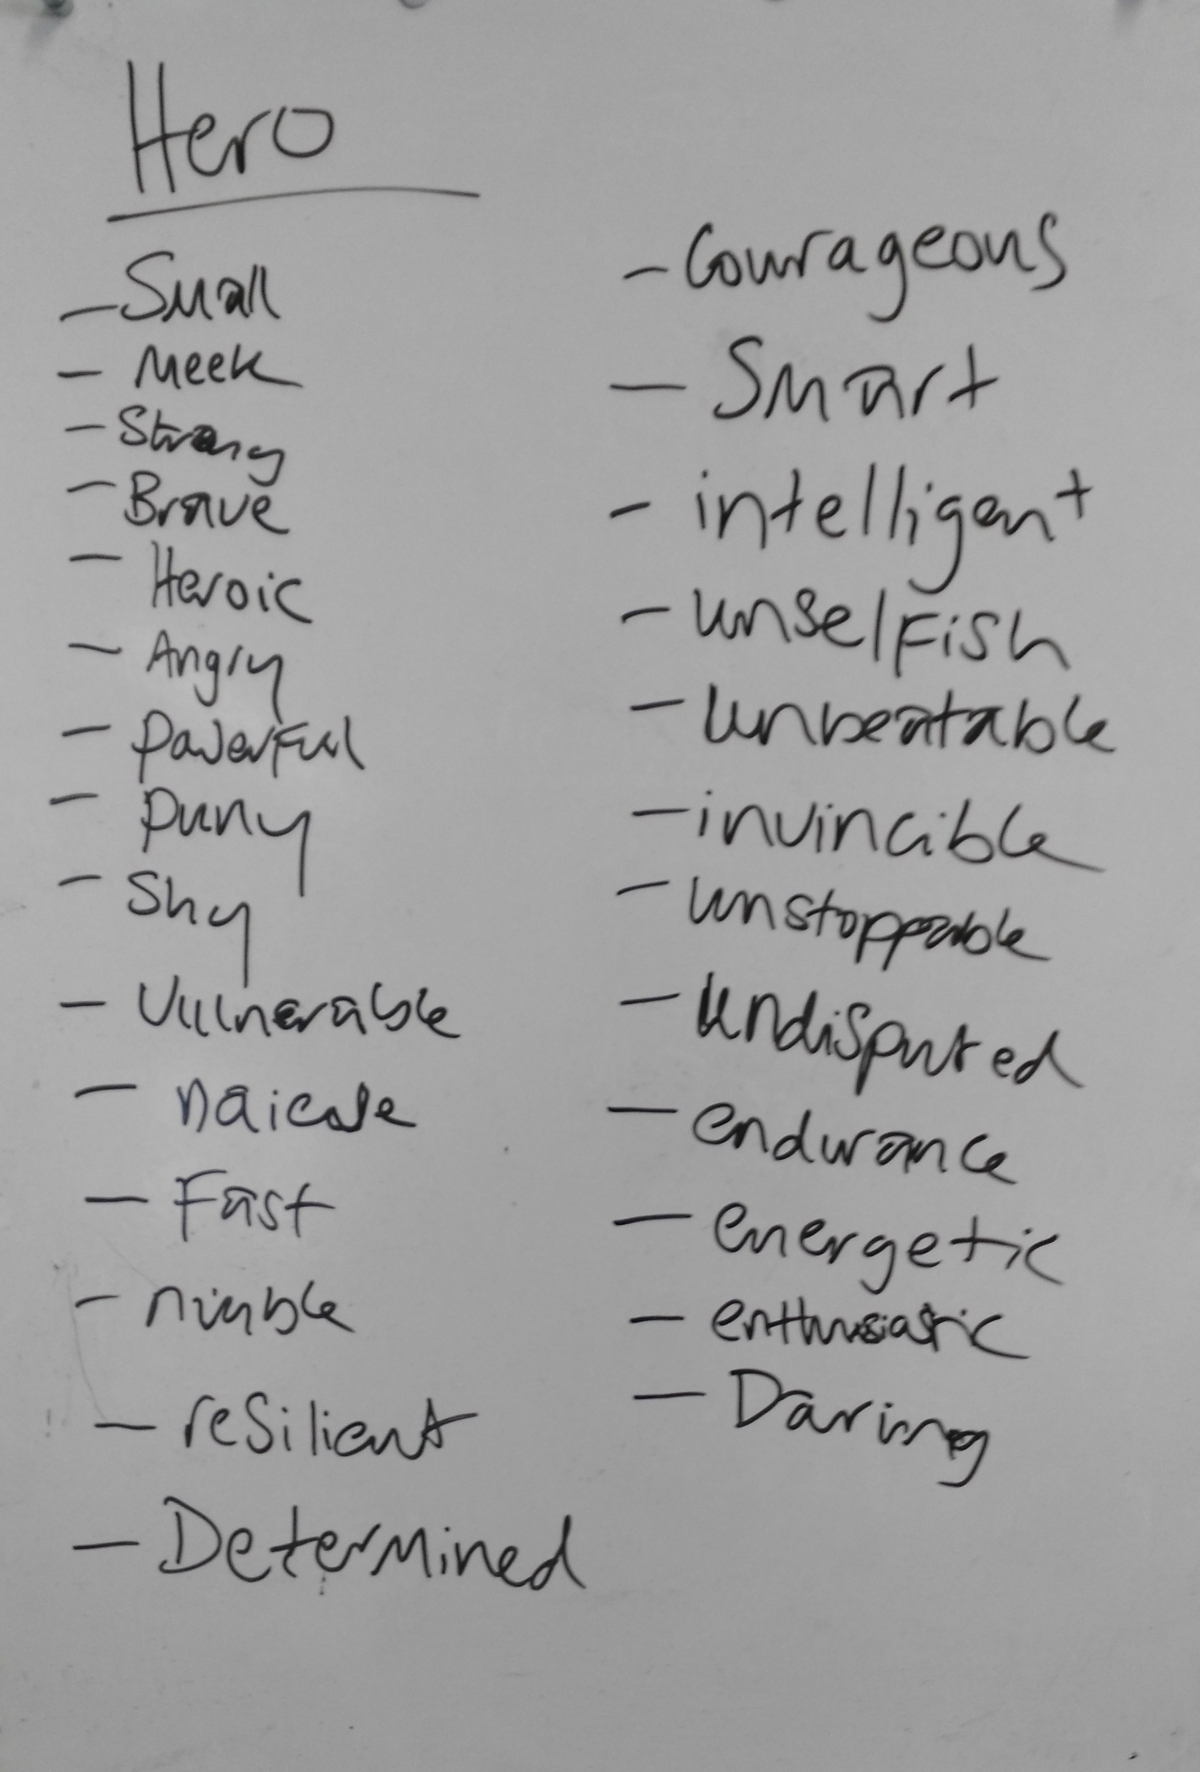 List of words we might use to describe our hero